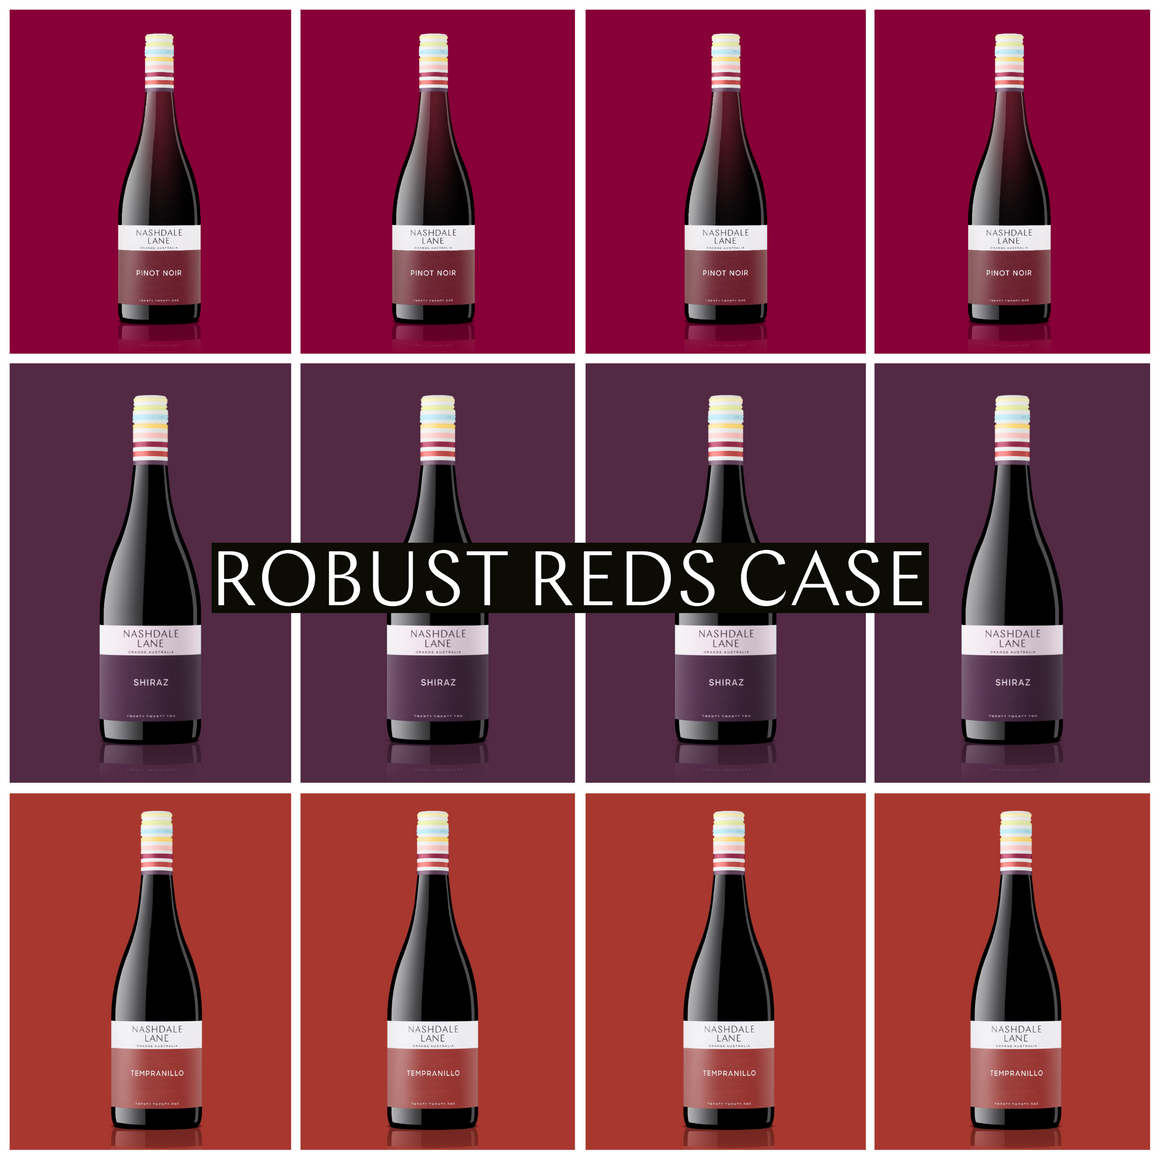 Robust Reds Case